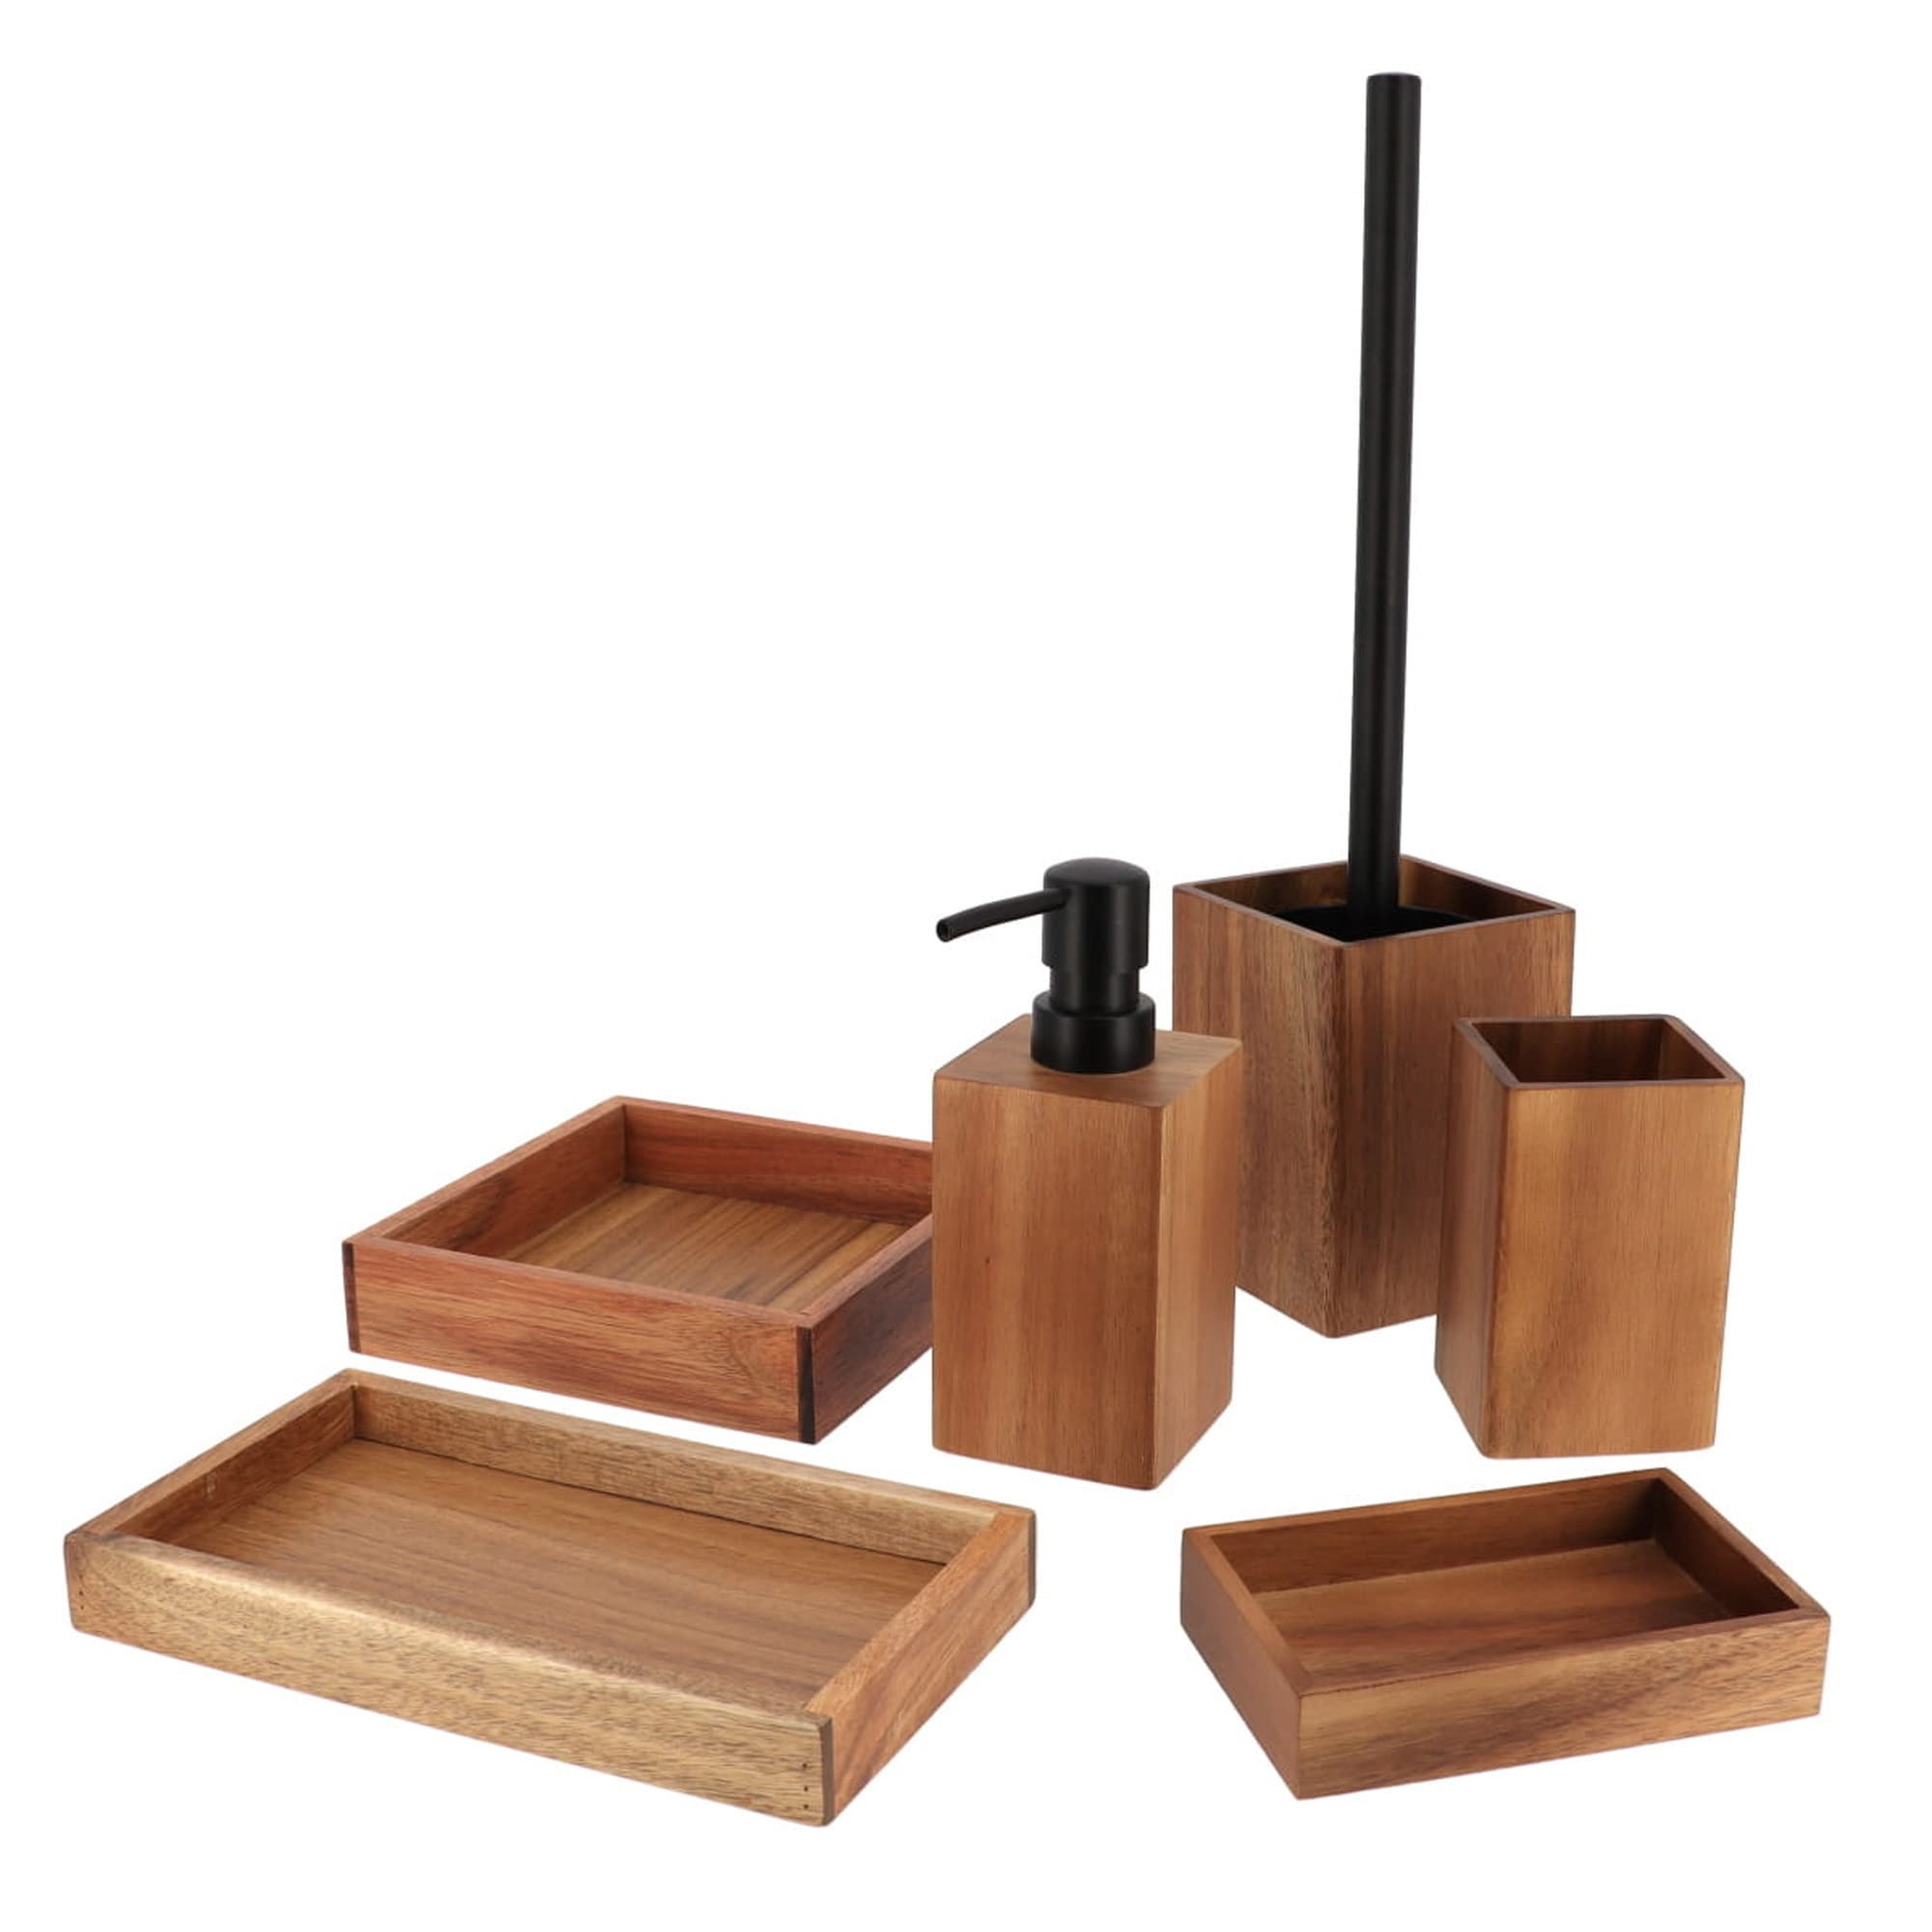 https://ak1.ostkcdn.com/images/products/is/images/direct/cc7fe9a1c581df21f78ddc01f23caba318aa76a6/Acacia-Wood-Bathroom-Accessory-Set-Collection.jpg